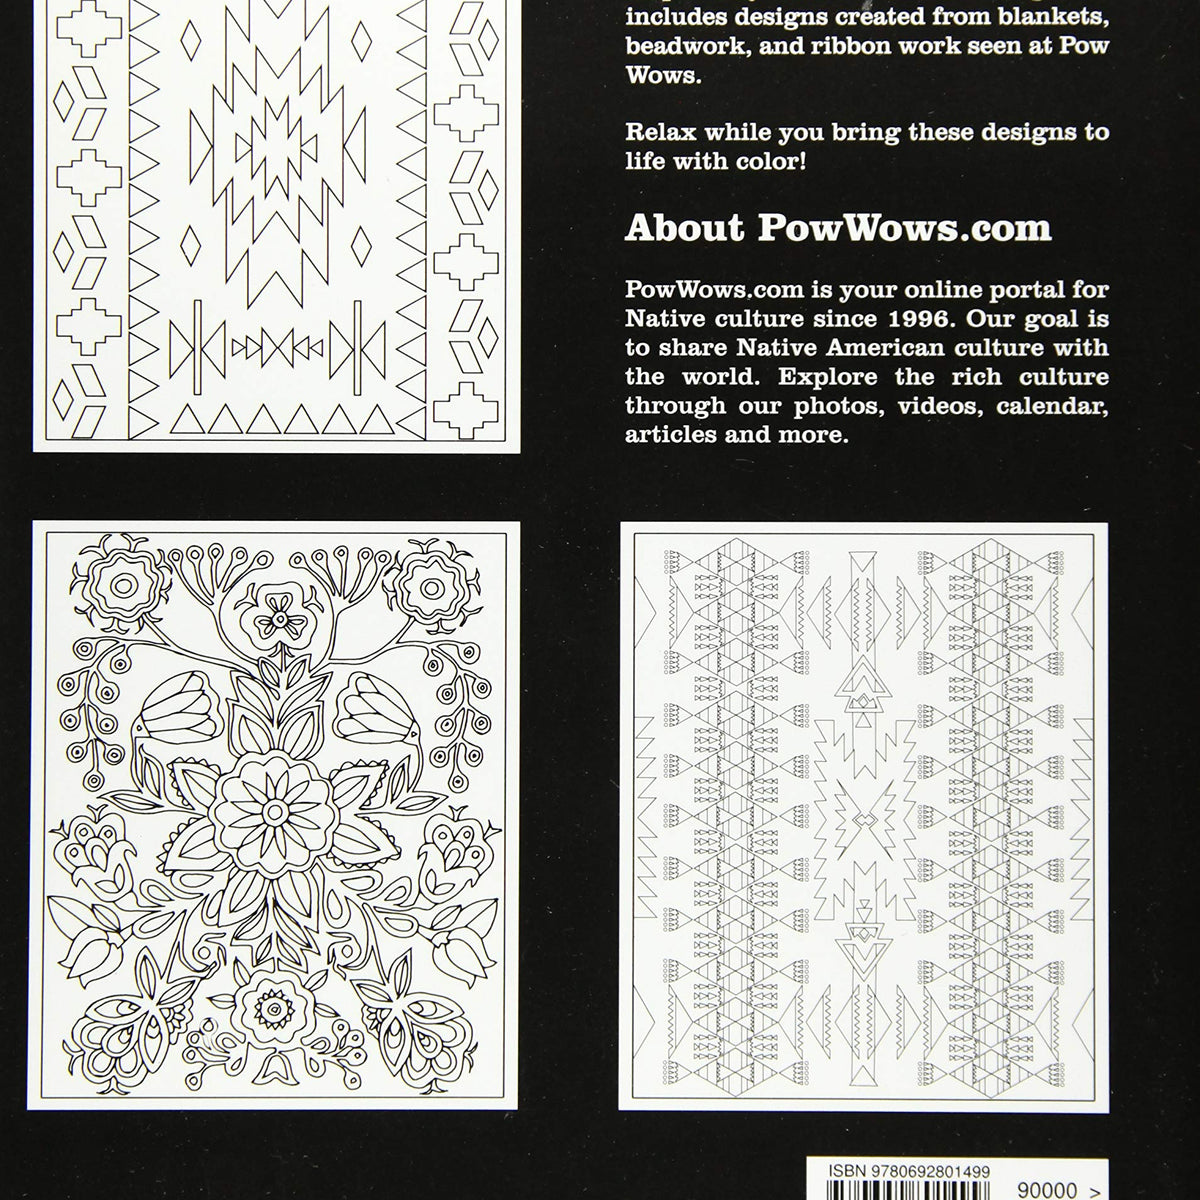 Pow Wow Coloring Book - Volume 1